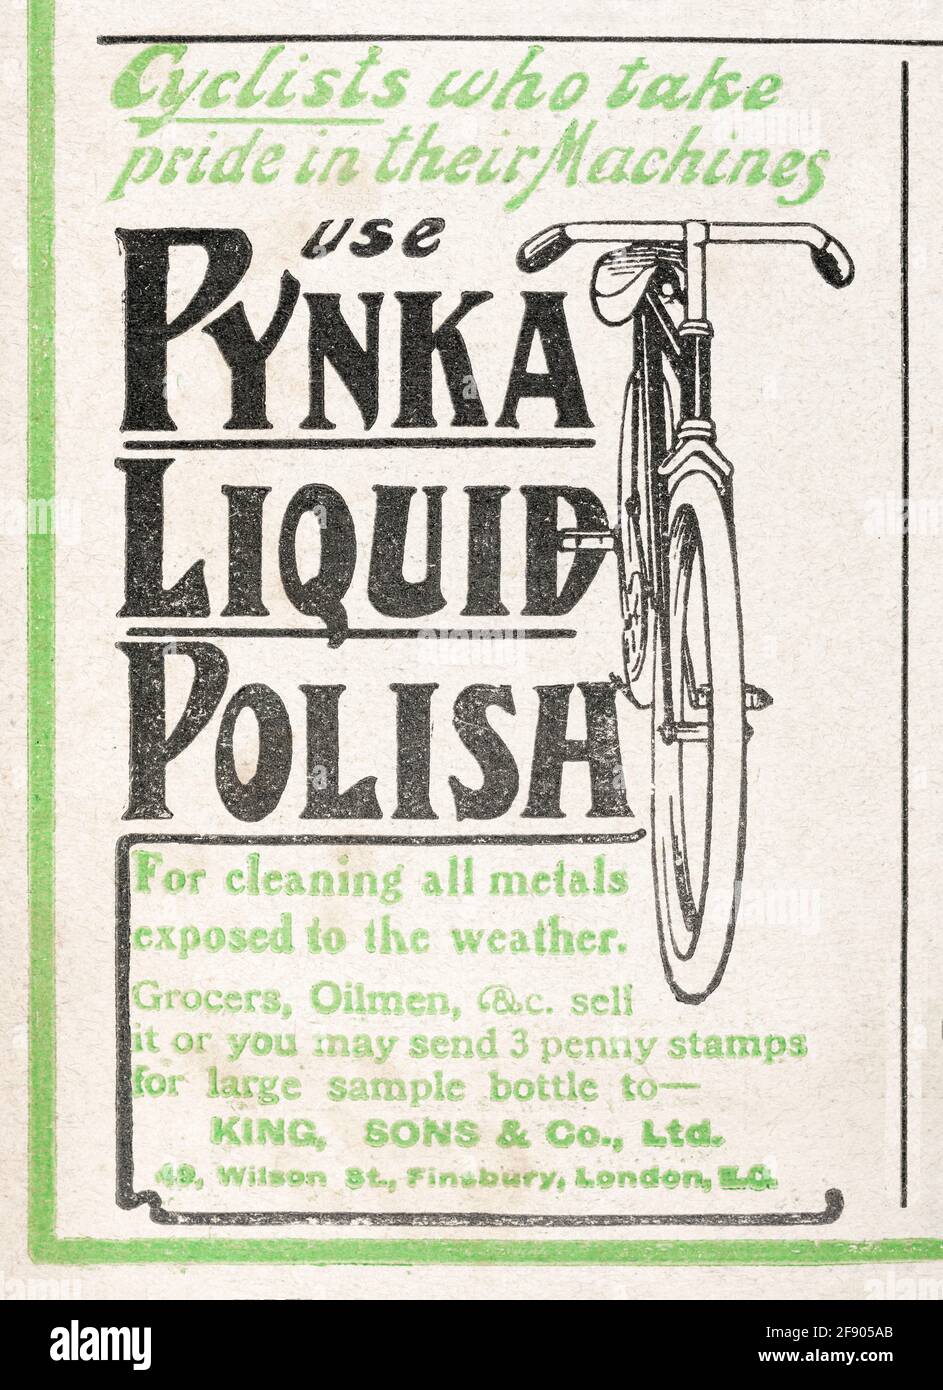 Old vintage Victorian Pynka bicycle polish advert from 1906 - pre advertising standards. History of advertising, old cycling adverts. Stock Photo